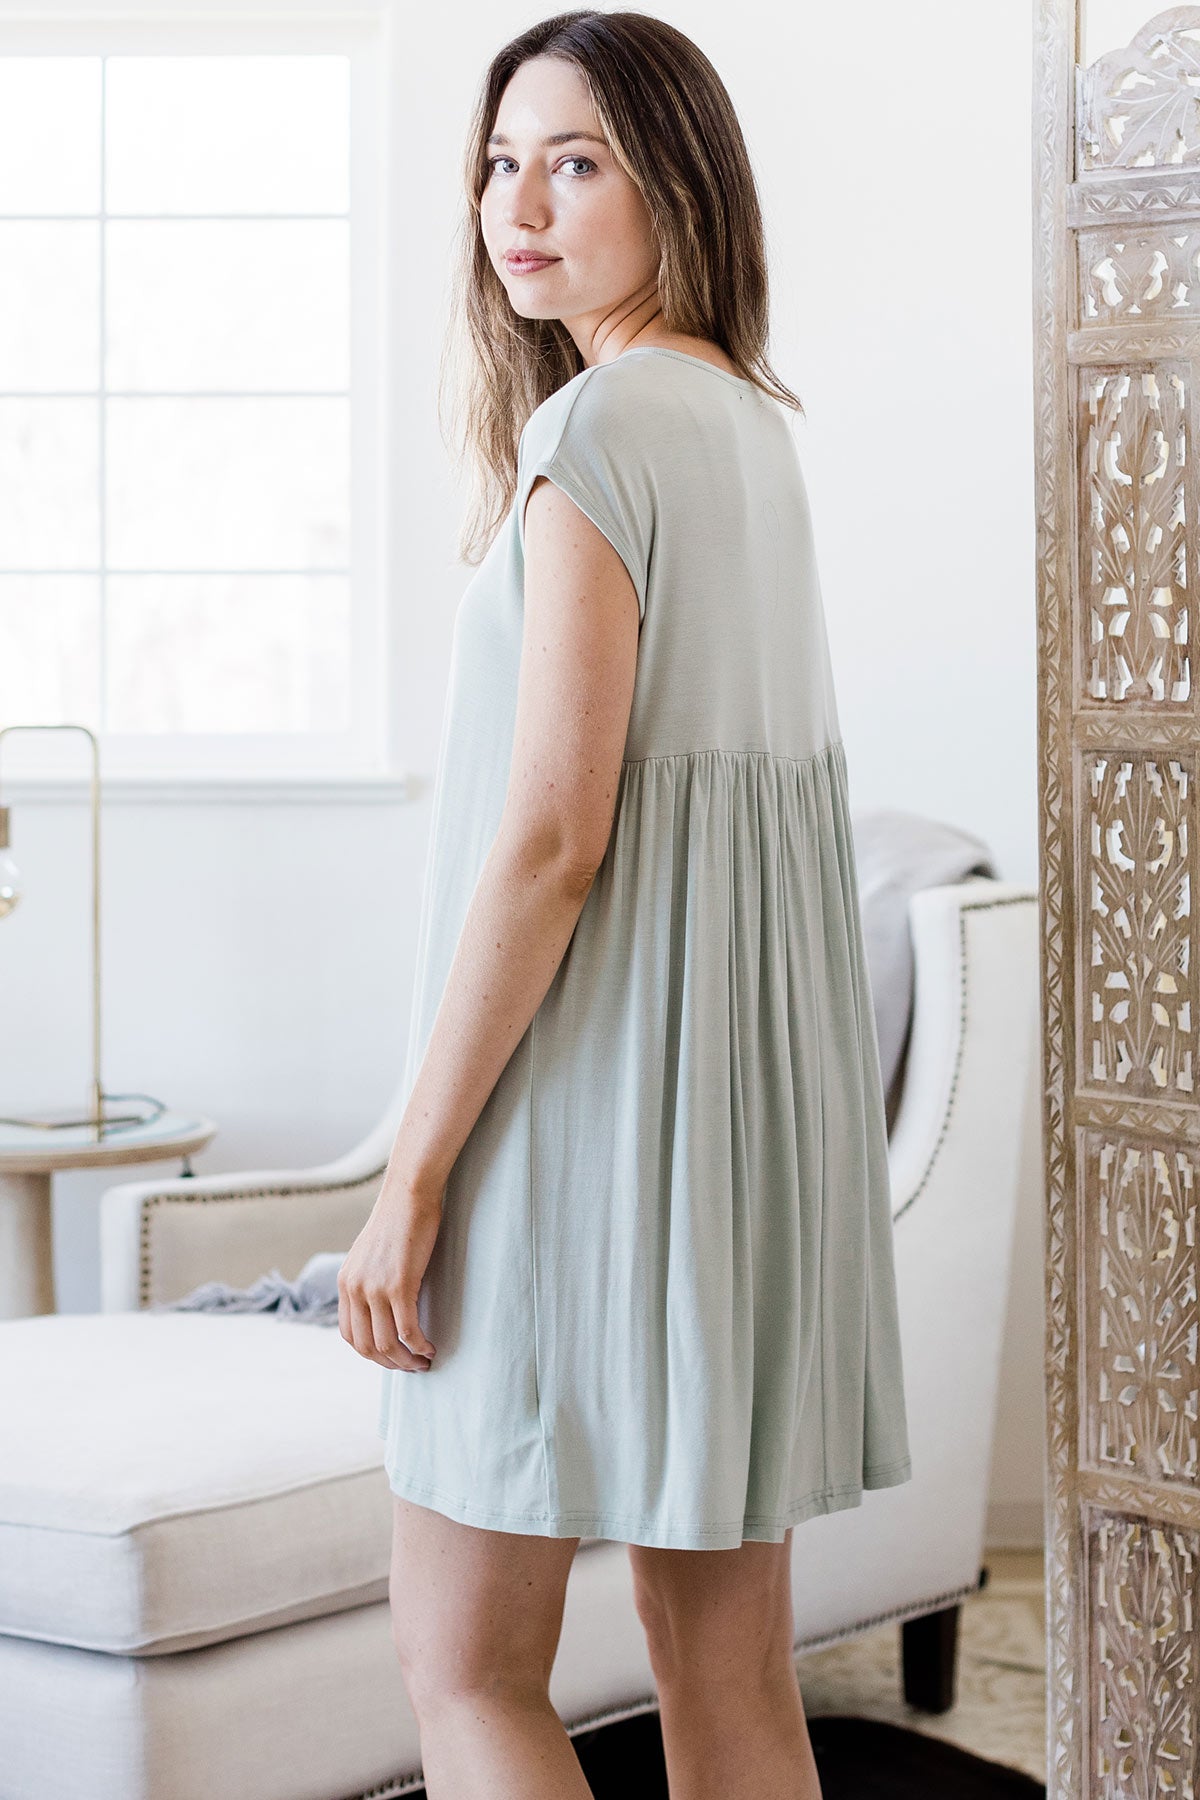 A woman facing away and looking back over her shoulder towards the camera, wearing Yala Opal Swing Bamboo Nightshirt in Honeydew